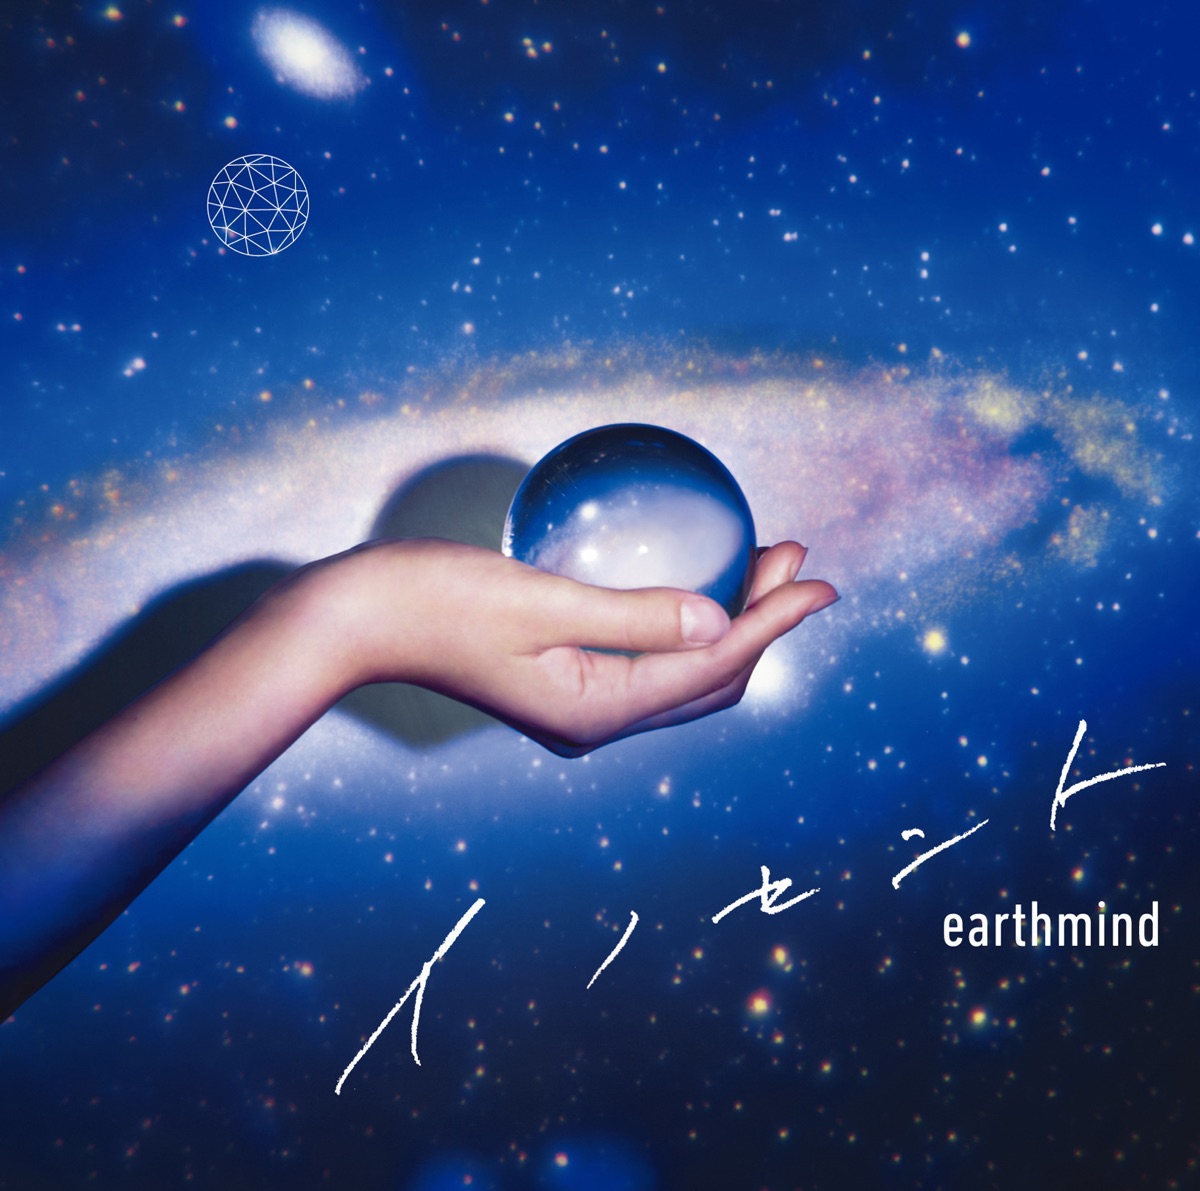 Cover art for『earthmind - イノセント』from the release『Innocent